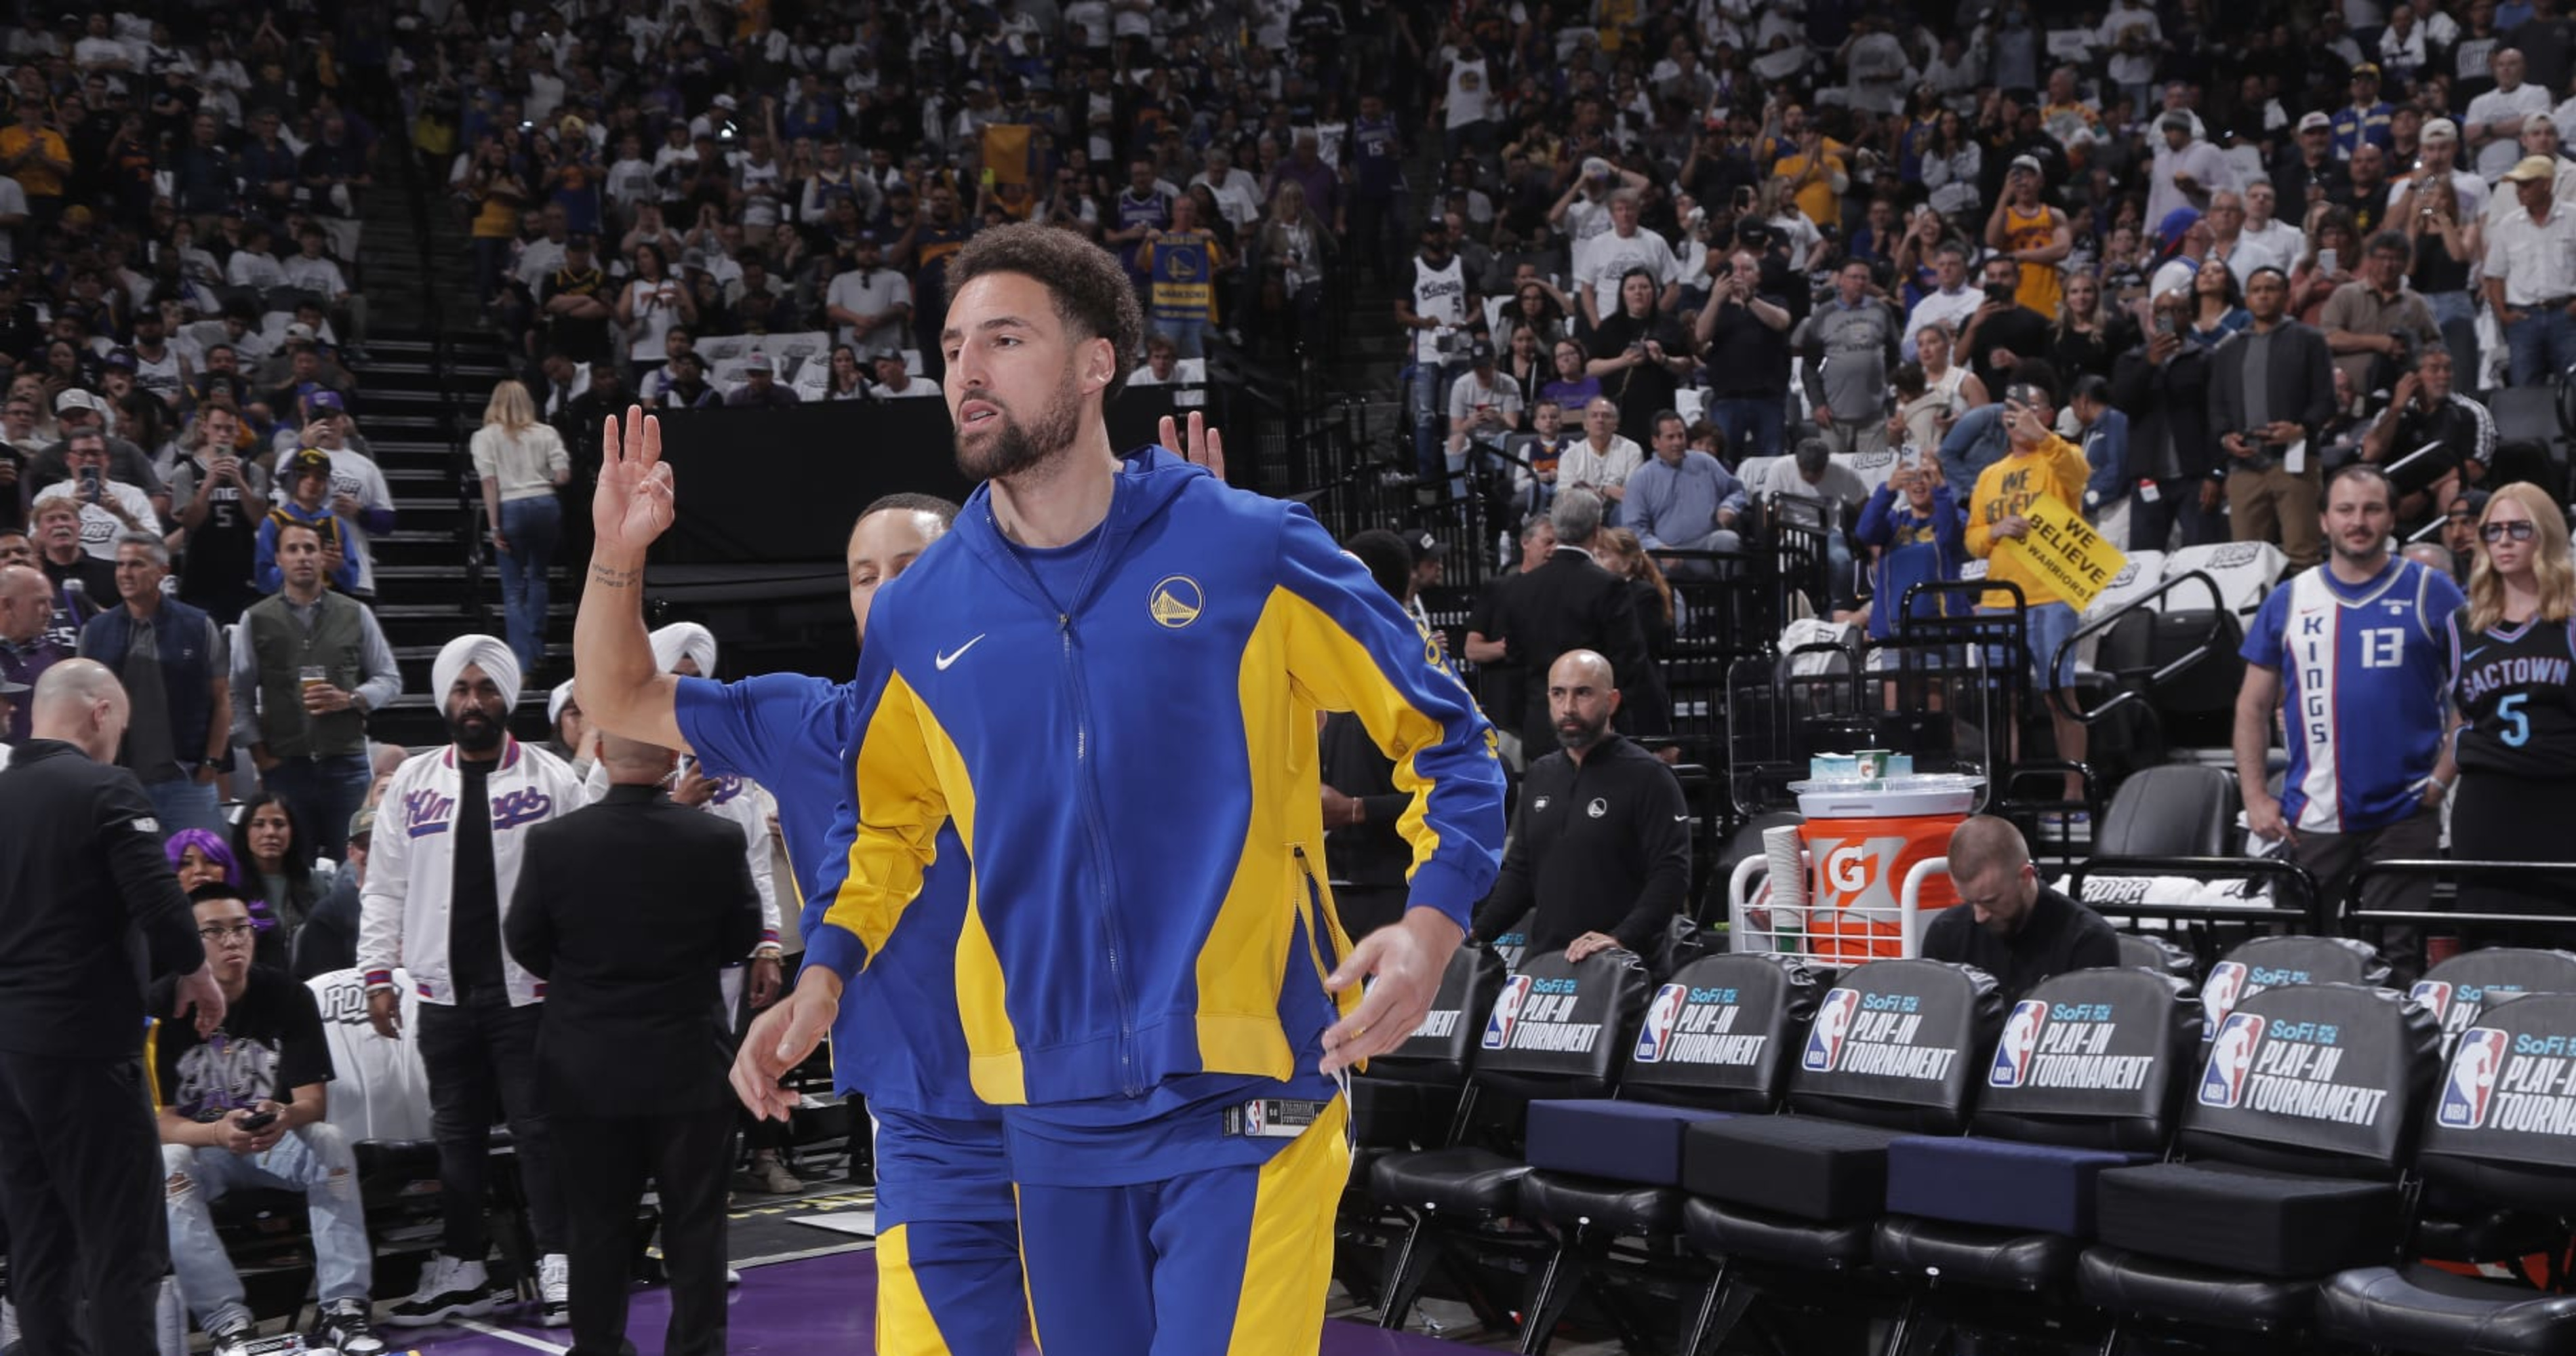 Klay Thompson to Wear No. 31 Jersey with Mavs After Sign-and-Trade from Warriors